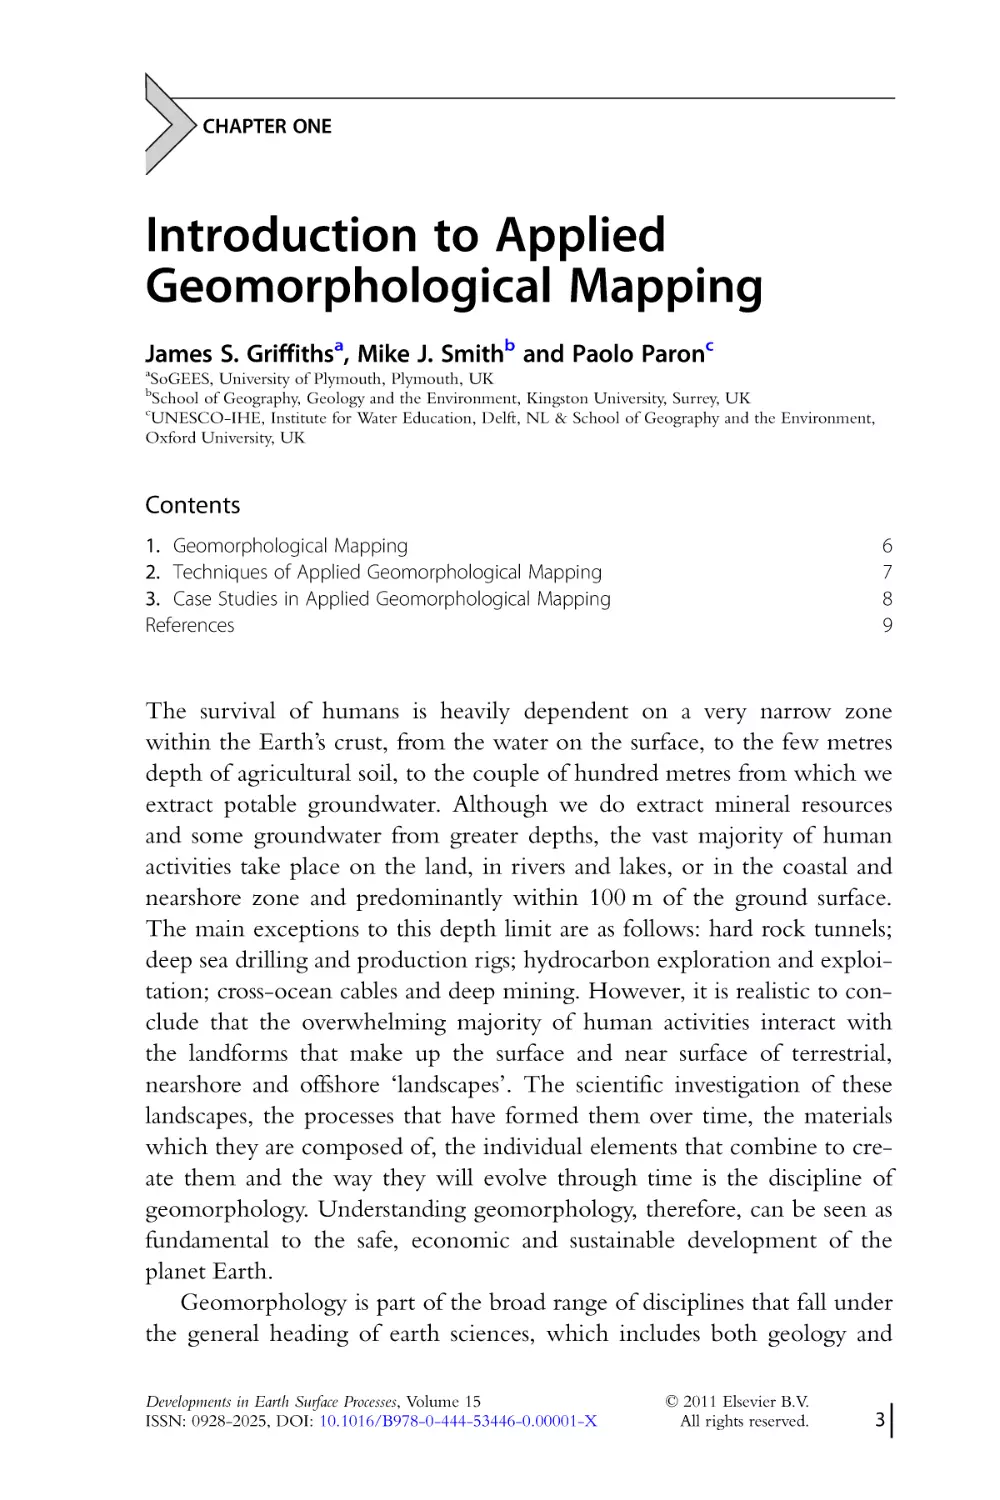 CHAPTER ONE.
Introduction to Applied

Geomorphological Mapping